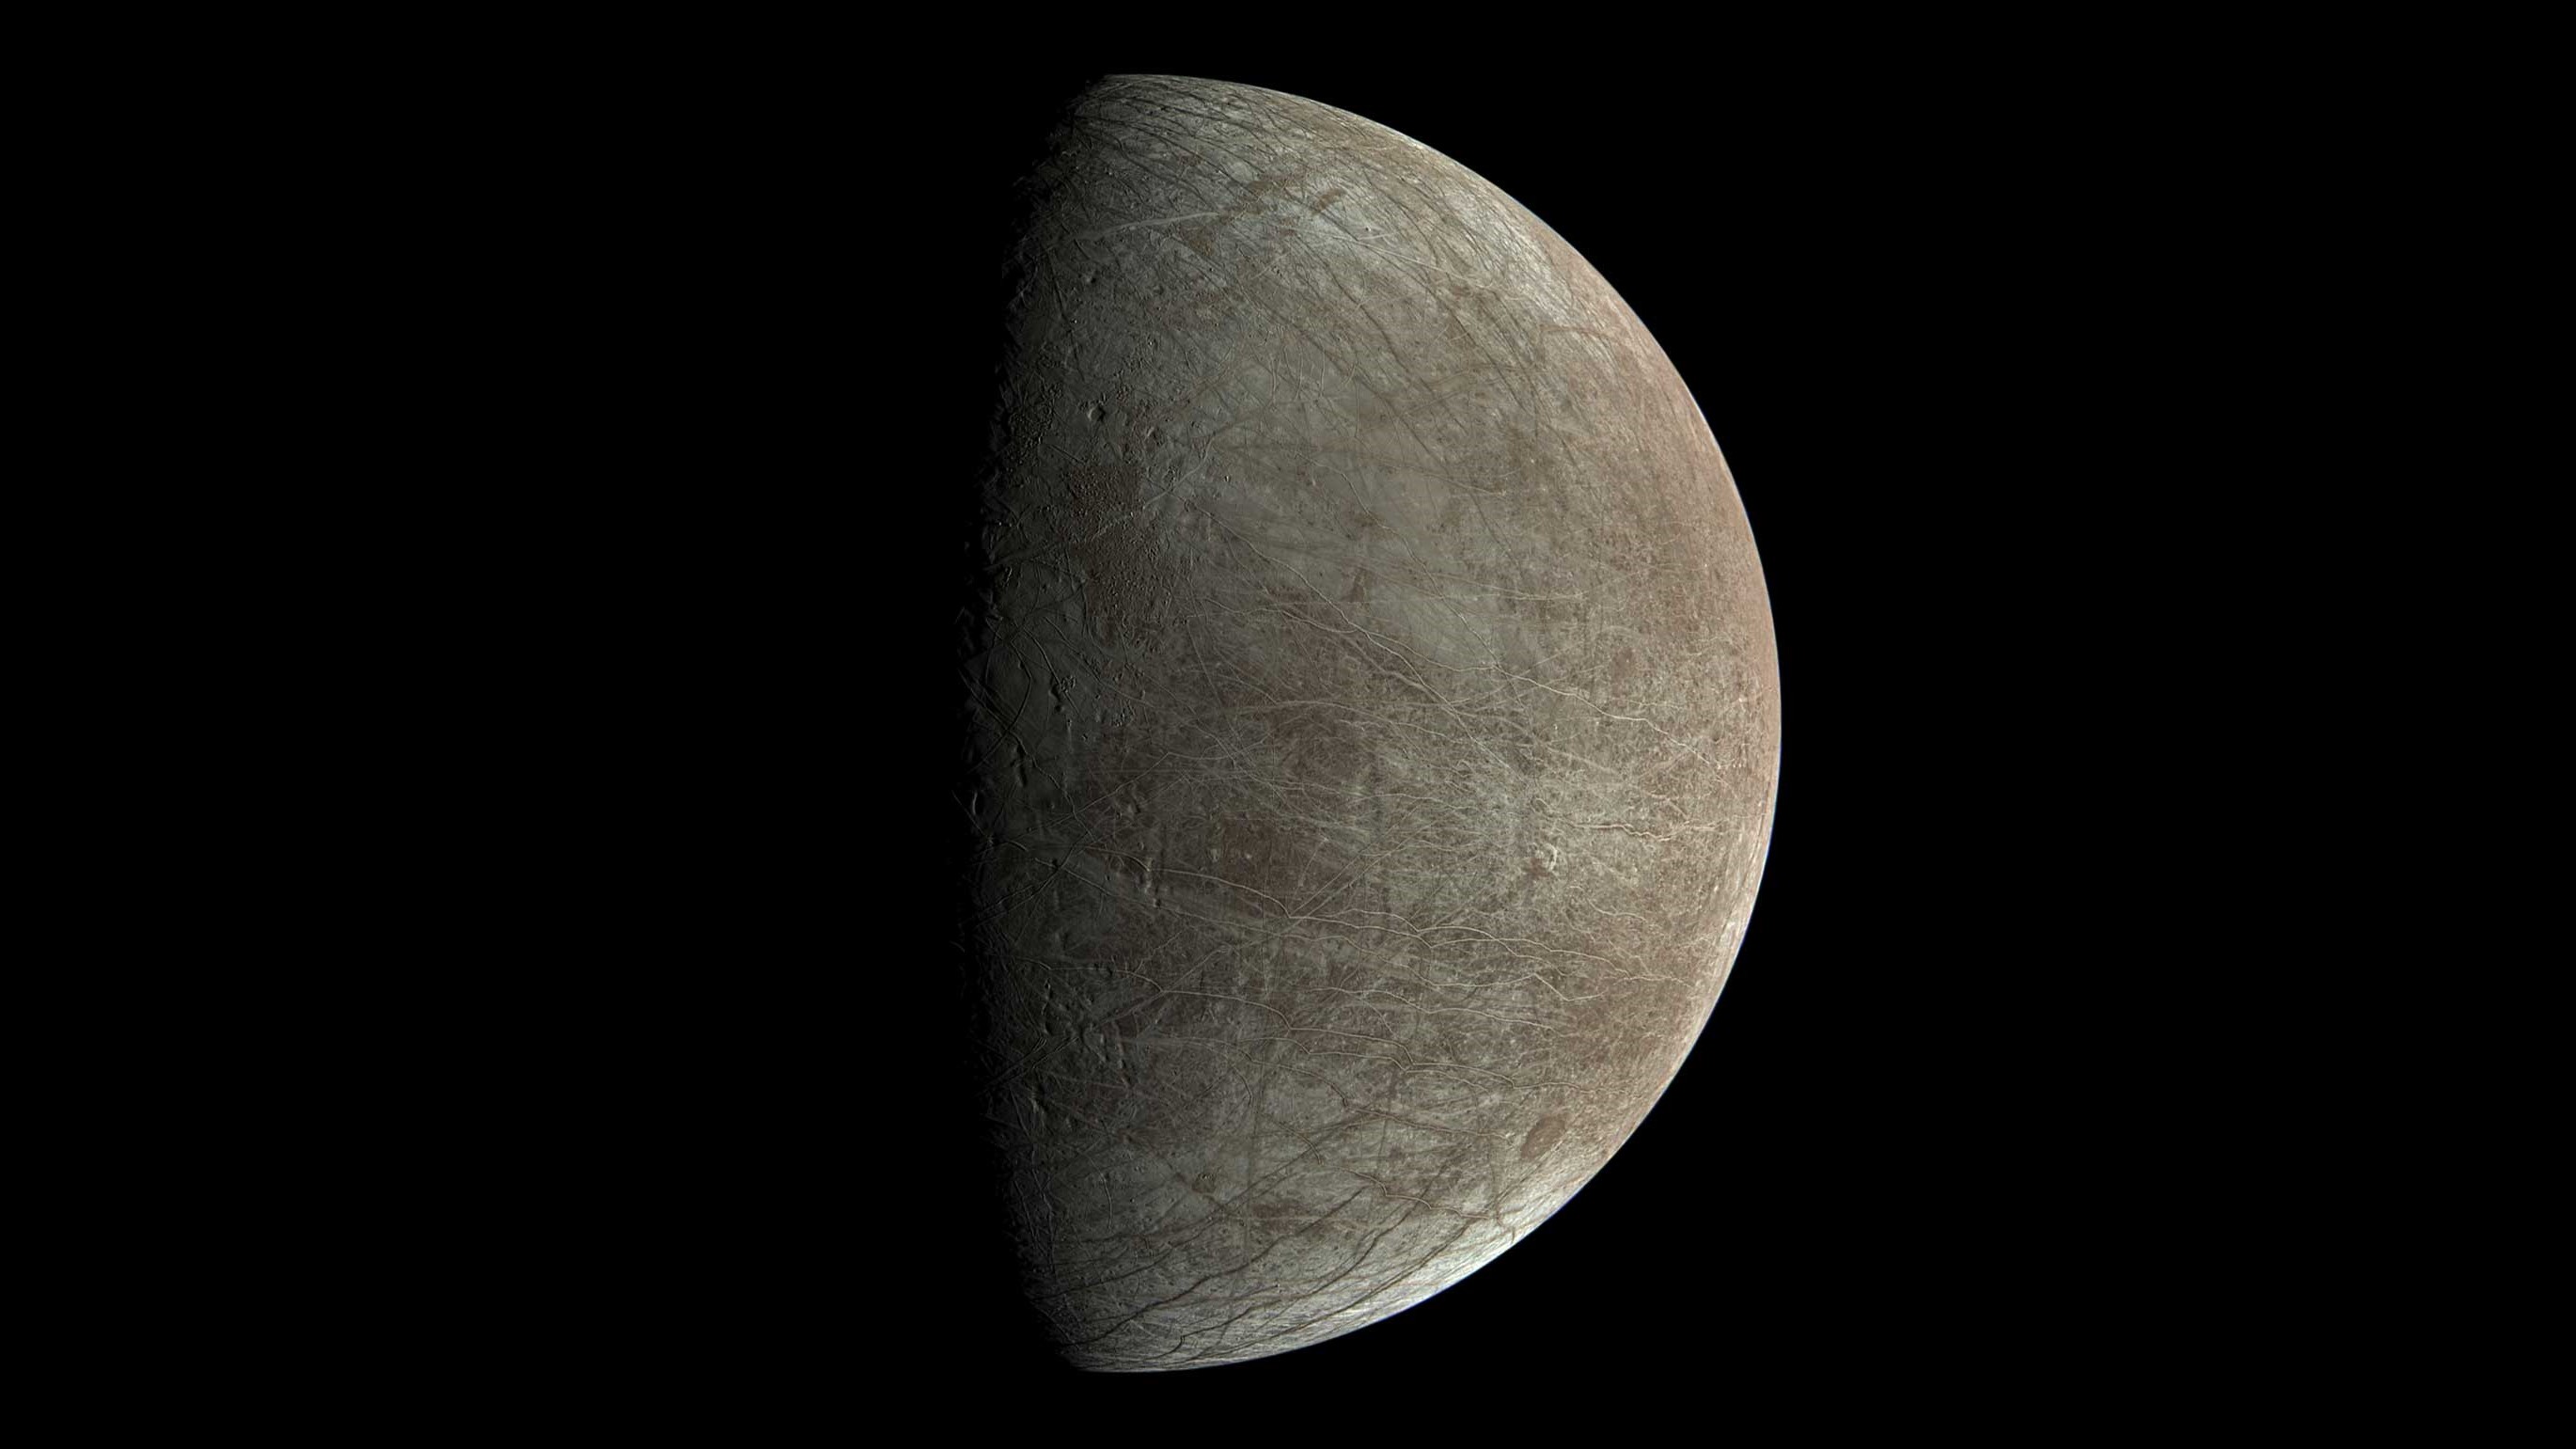 Europa's icy crust may let more material into hidden ocean than thought